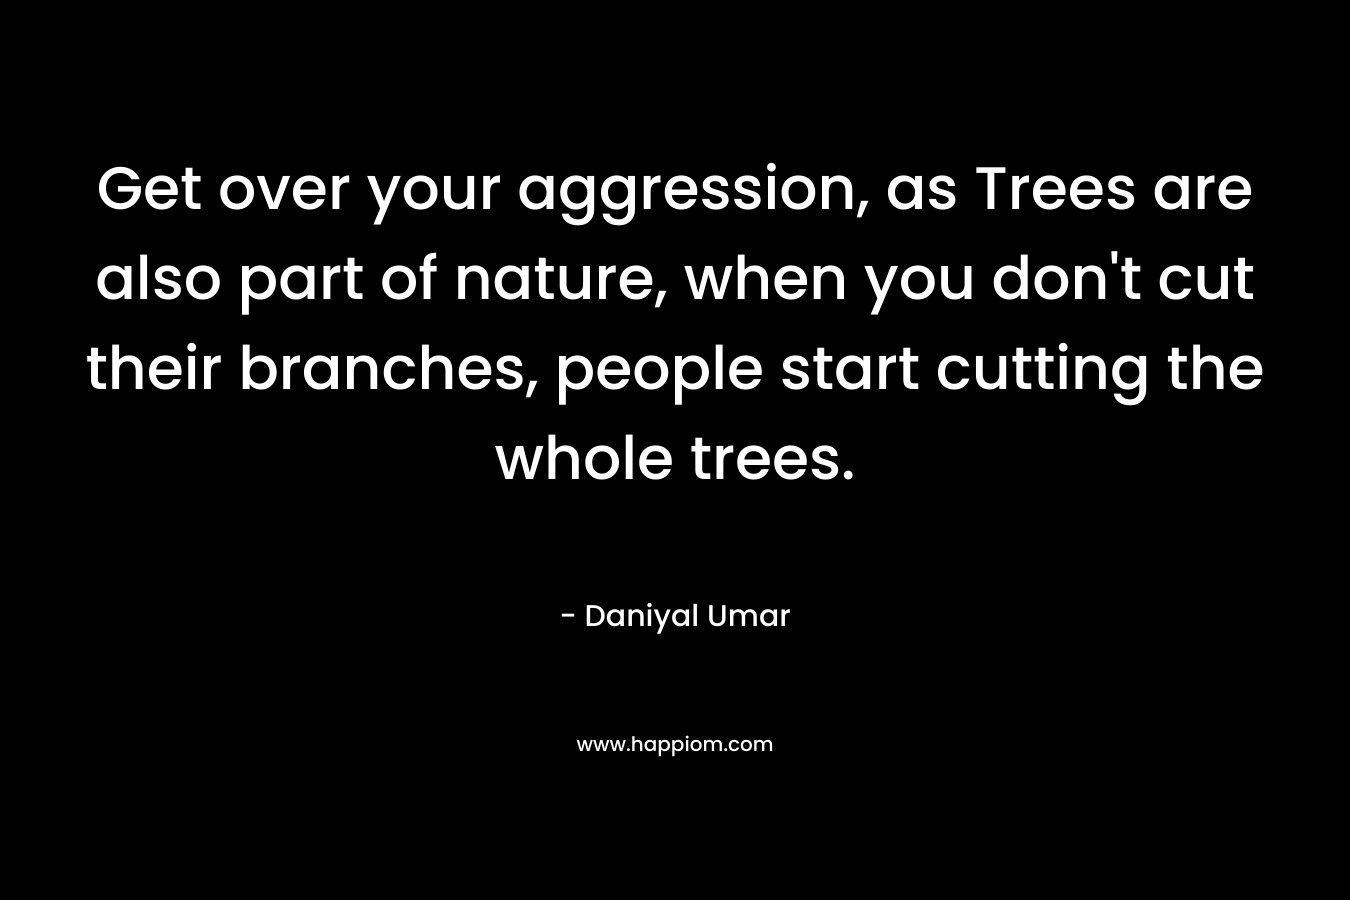 Get over your aggression, as Trees are also part of nature, when you don’t cut their branches, people start cutting the whole trees. – Daniyal Umar